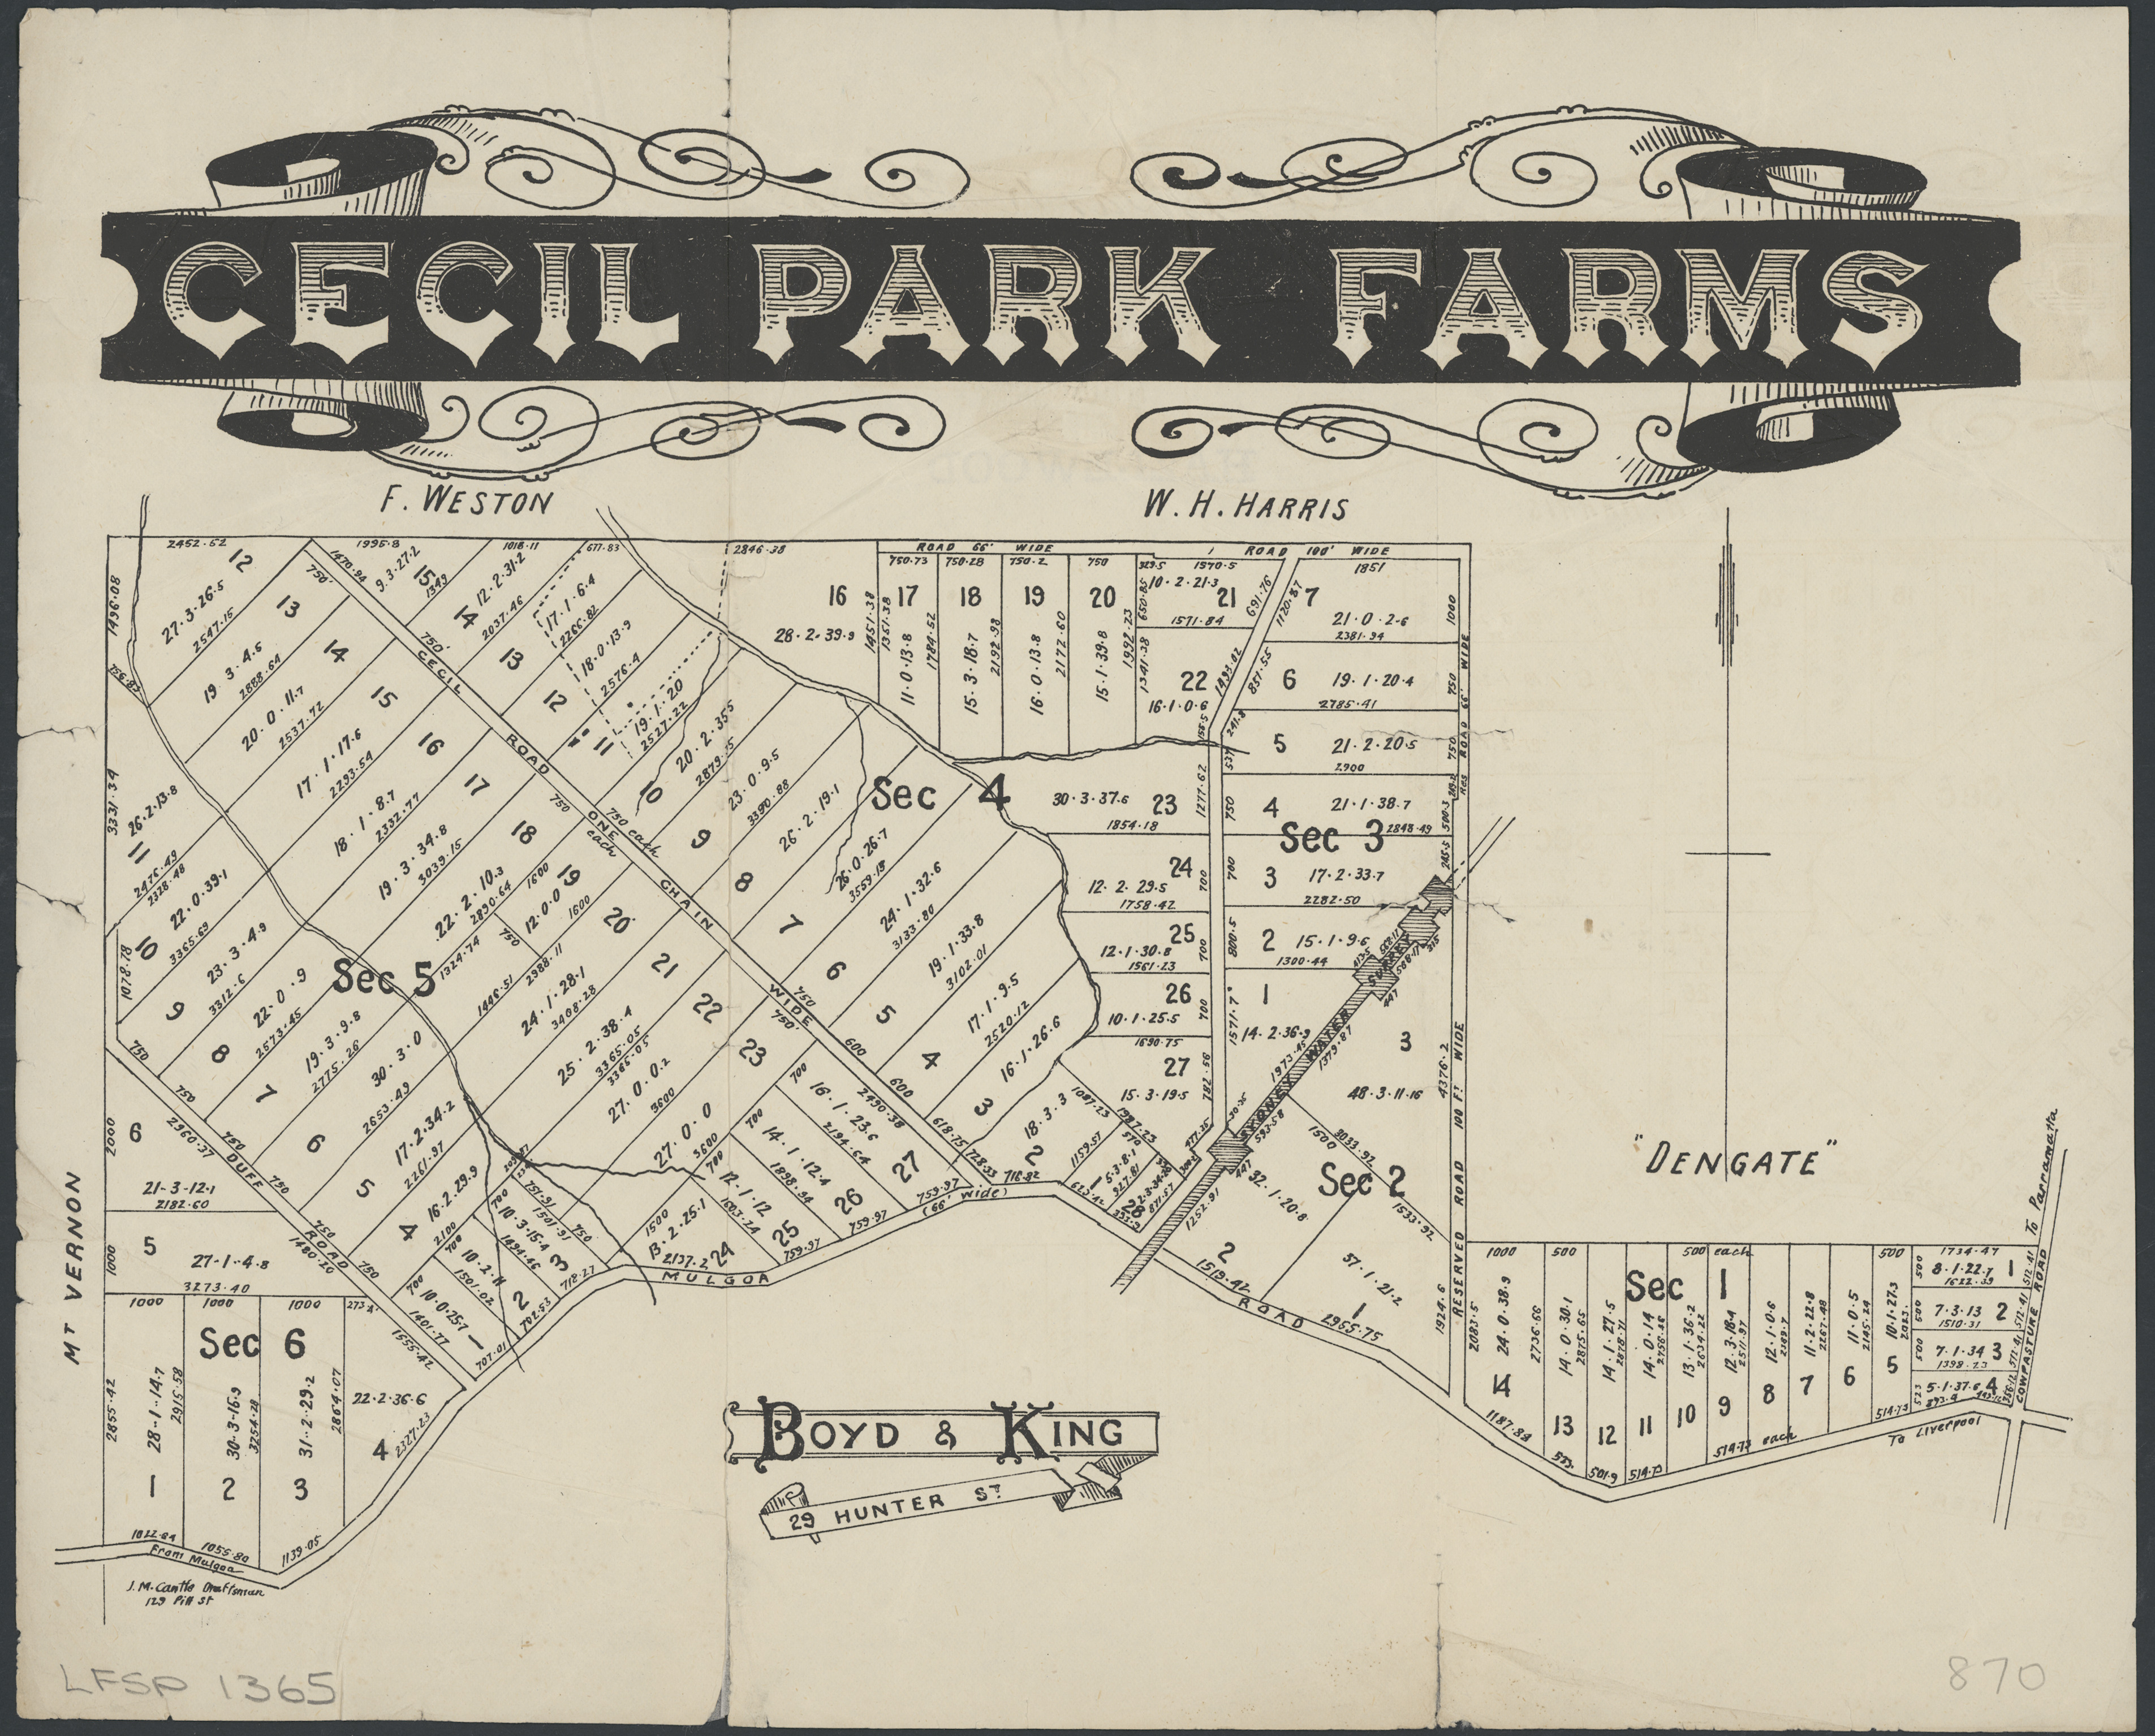 Cecil Park farms by Boyd & King & Cantle, 1885. Courtesy of the National Library of Australia [MAP LFSP 1365, Folder 93]